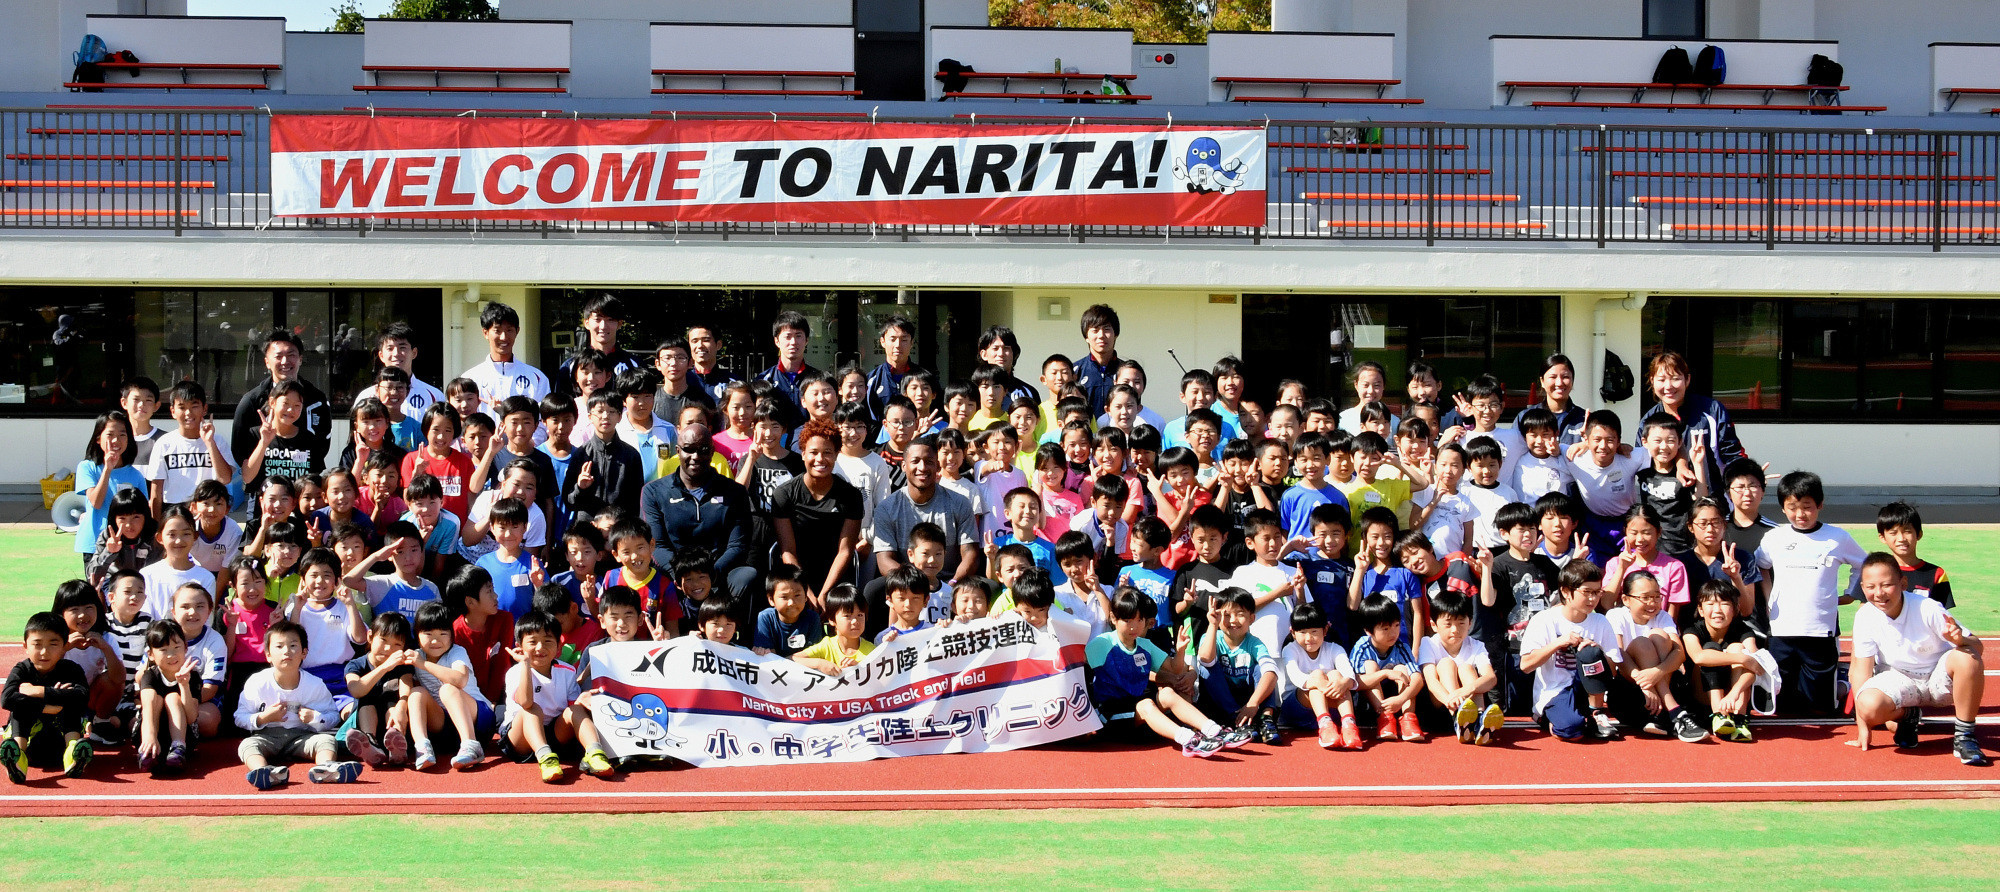 Narita is set to host a training camp for America's track and field team before the 2020 Olympic Games in Tokyo ©Twitter